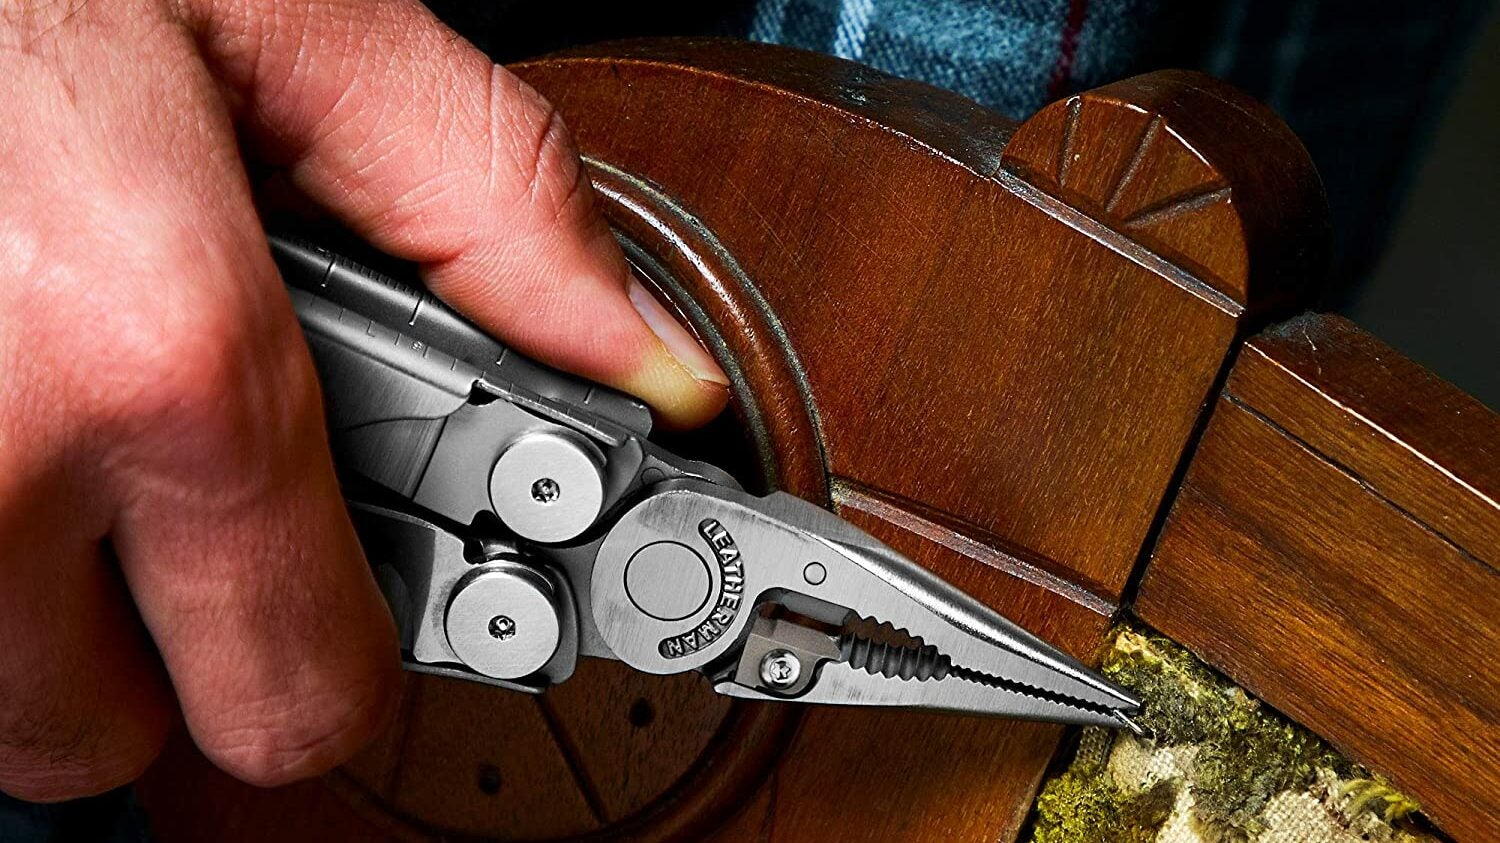 The History and Popularity of Leatherman Tools